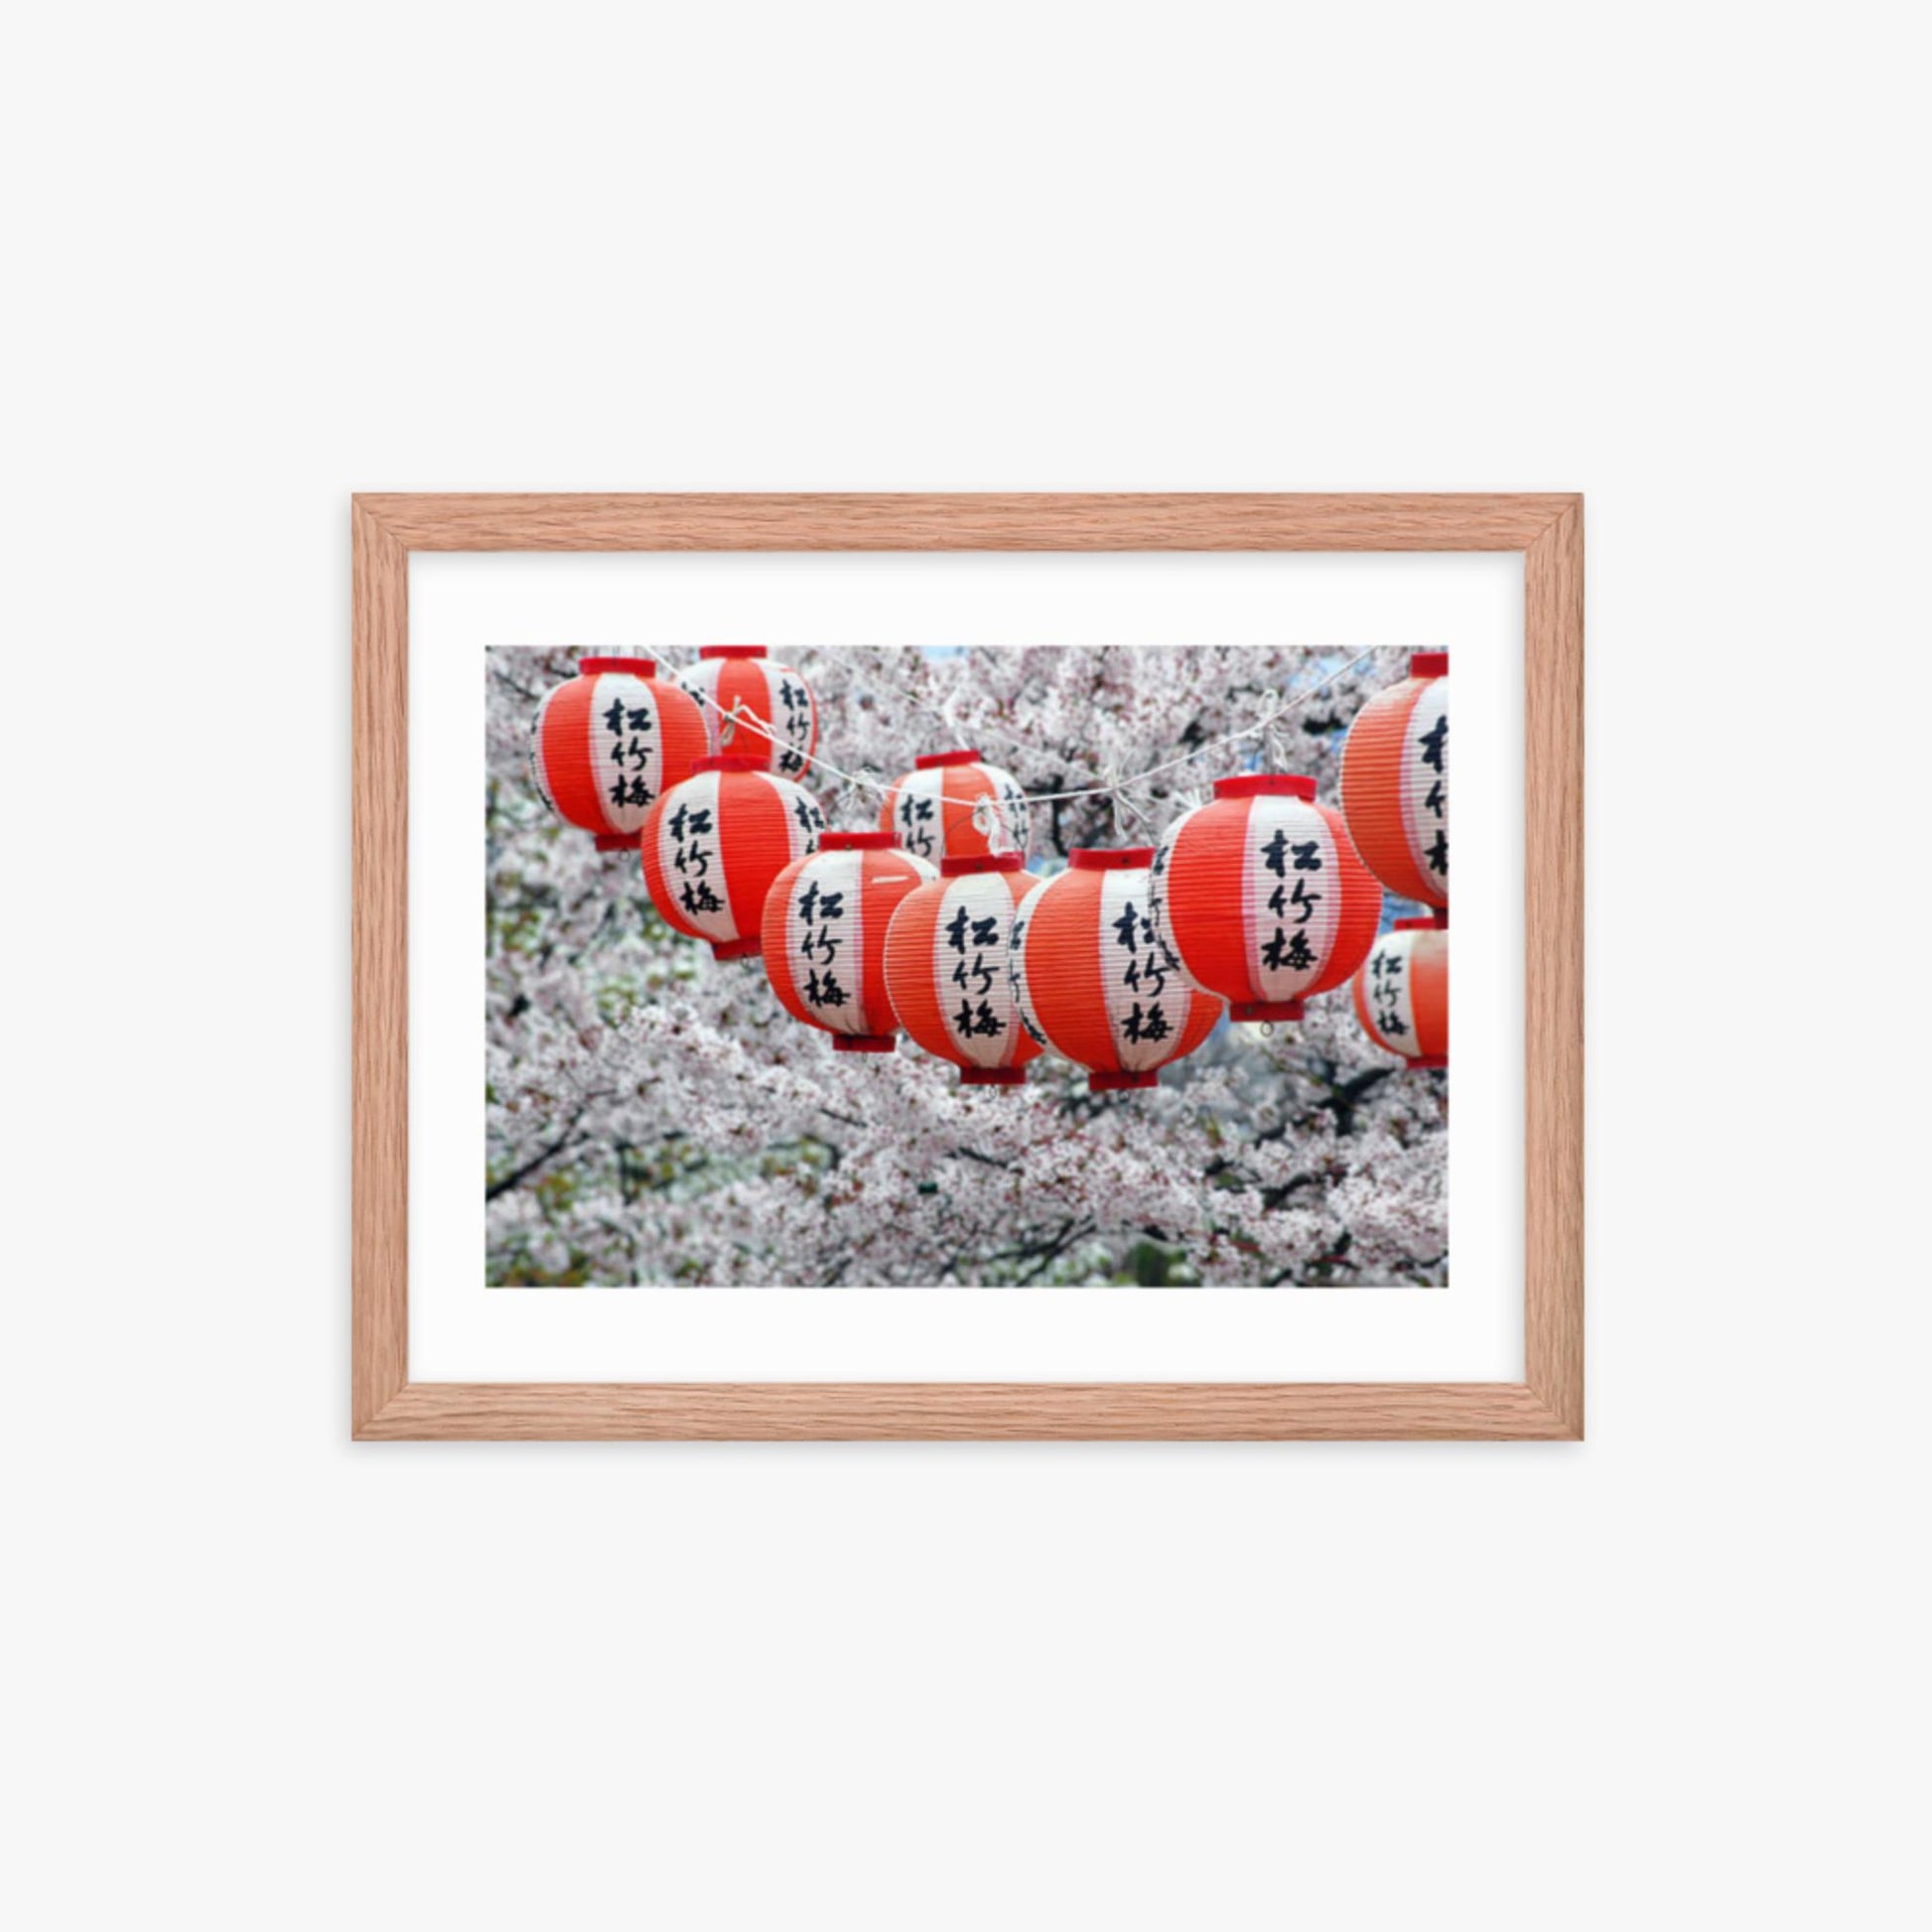 Japanese Lanterns and Cherry Blossom, Kyoto, Japan 12x16 in Poster With Oak Frame